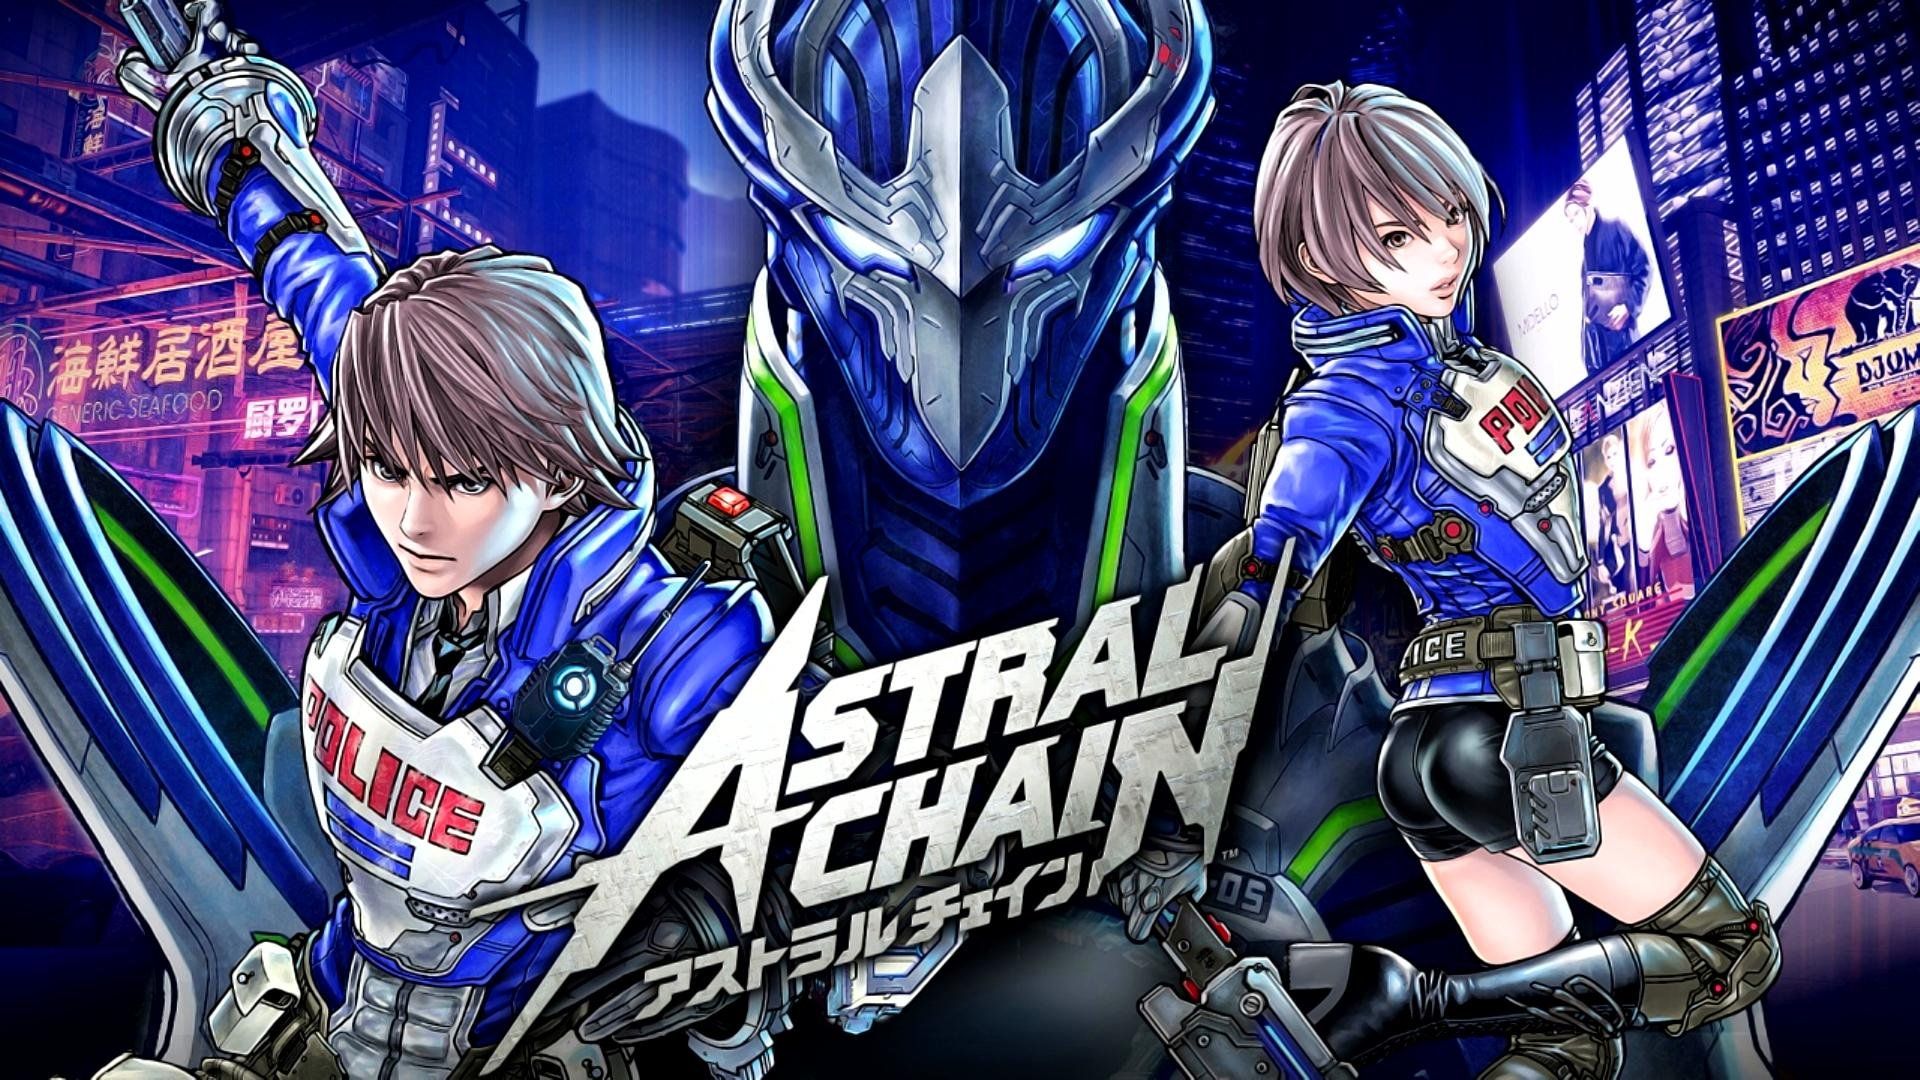 Is Astral Chain Coming to PS4? It's Too Early to Say